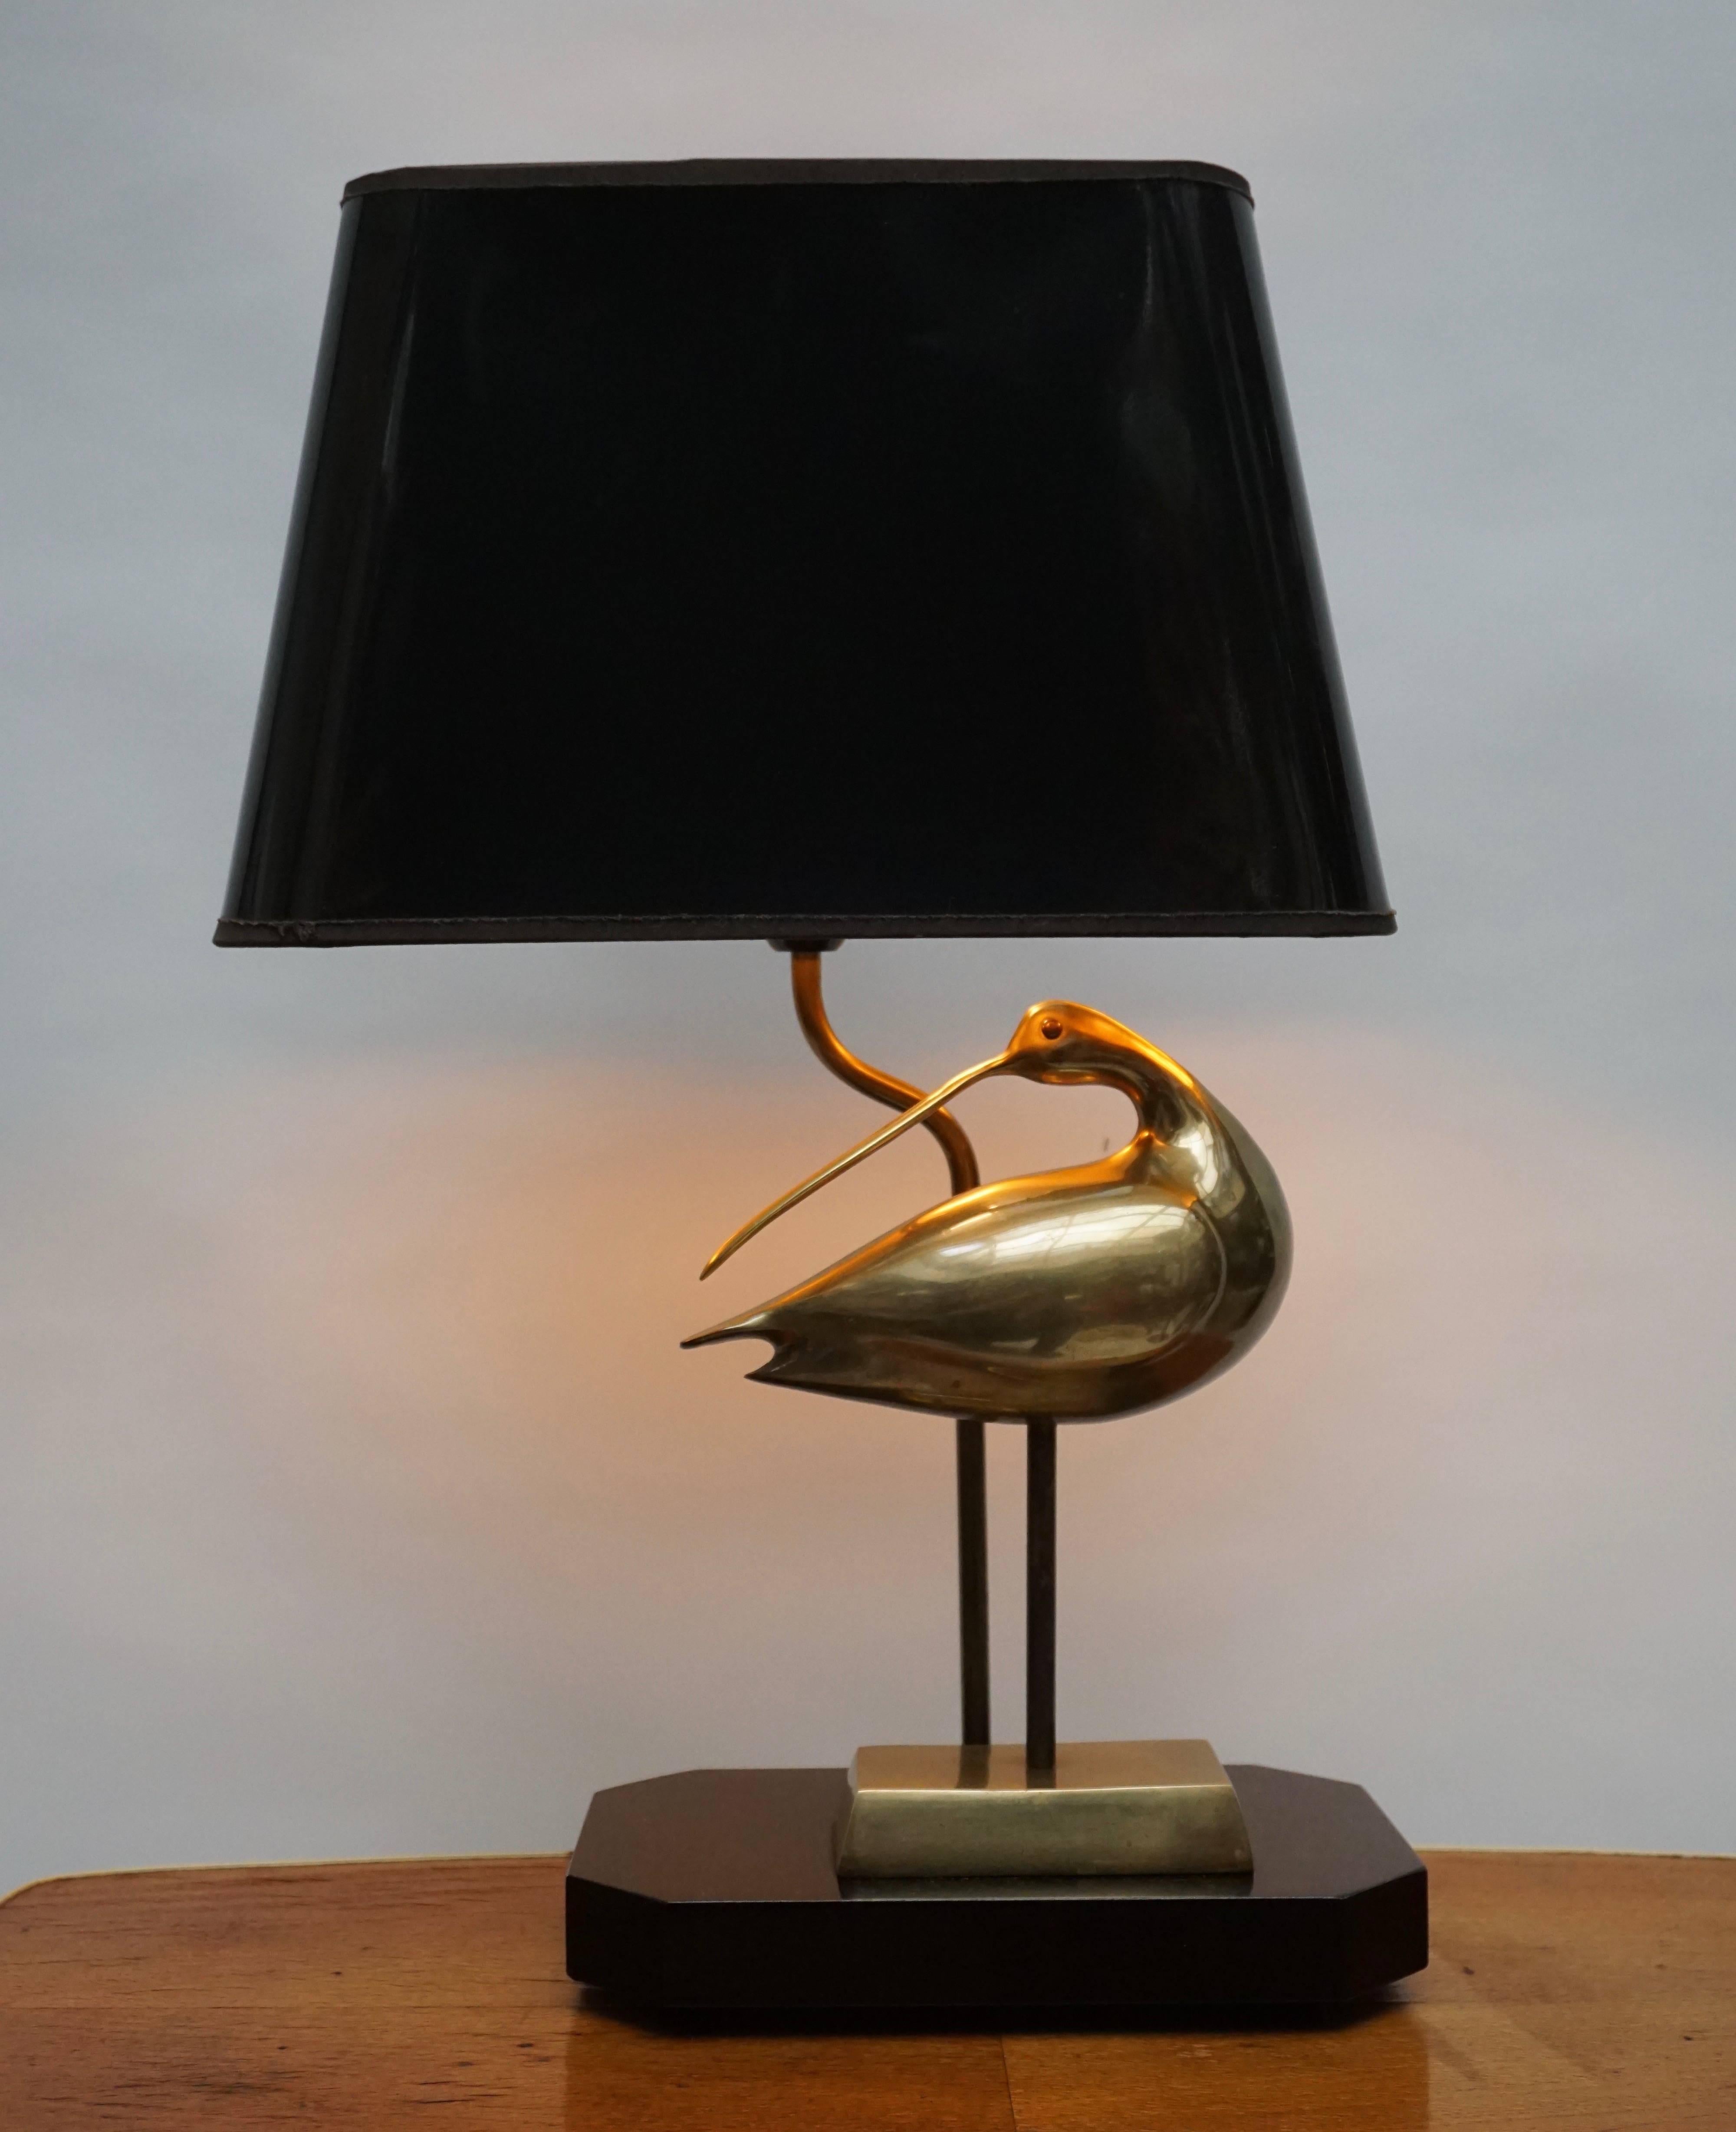 Brass table lamp.
Measures: Height:53 cm.